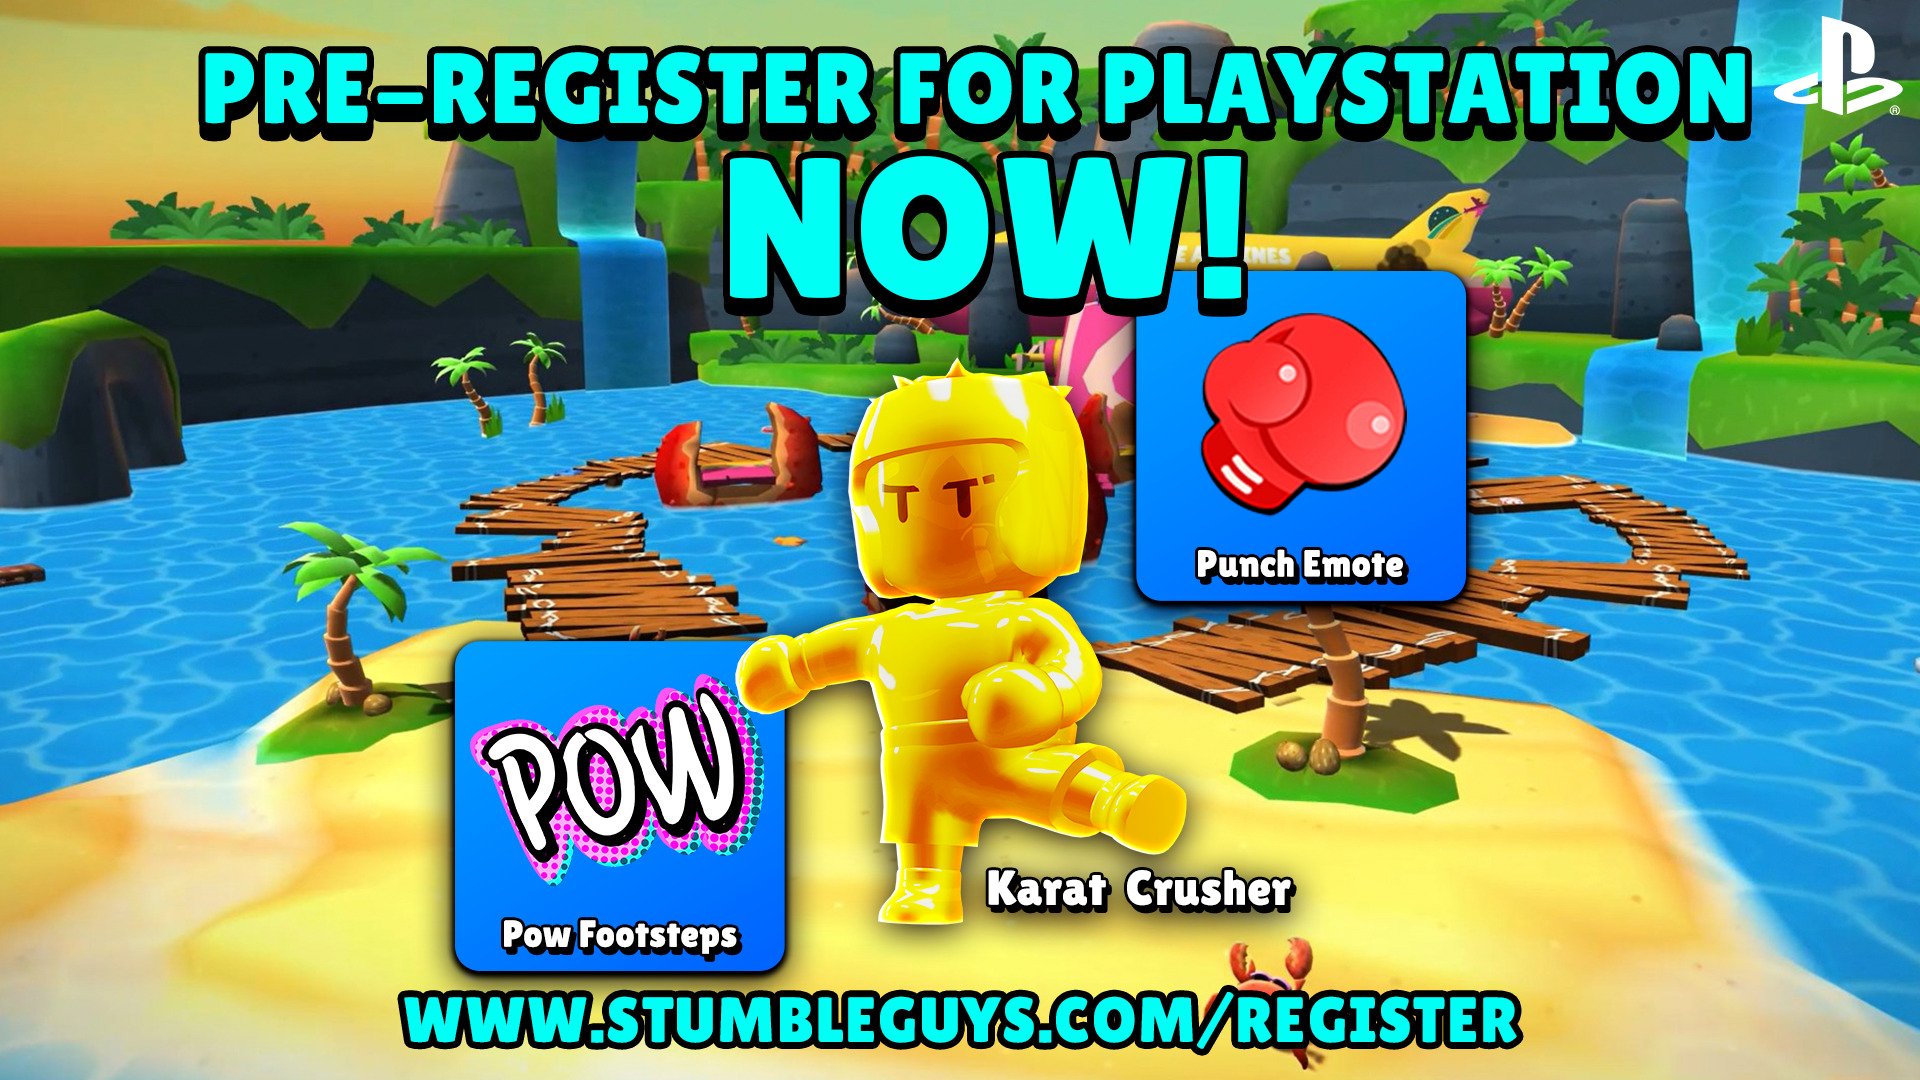 Stumble Guys for PlayStation 4 - Download